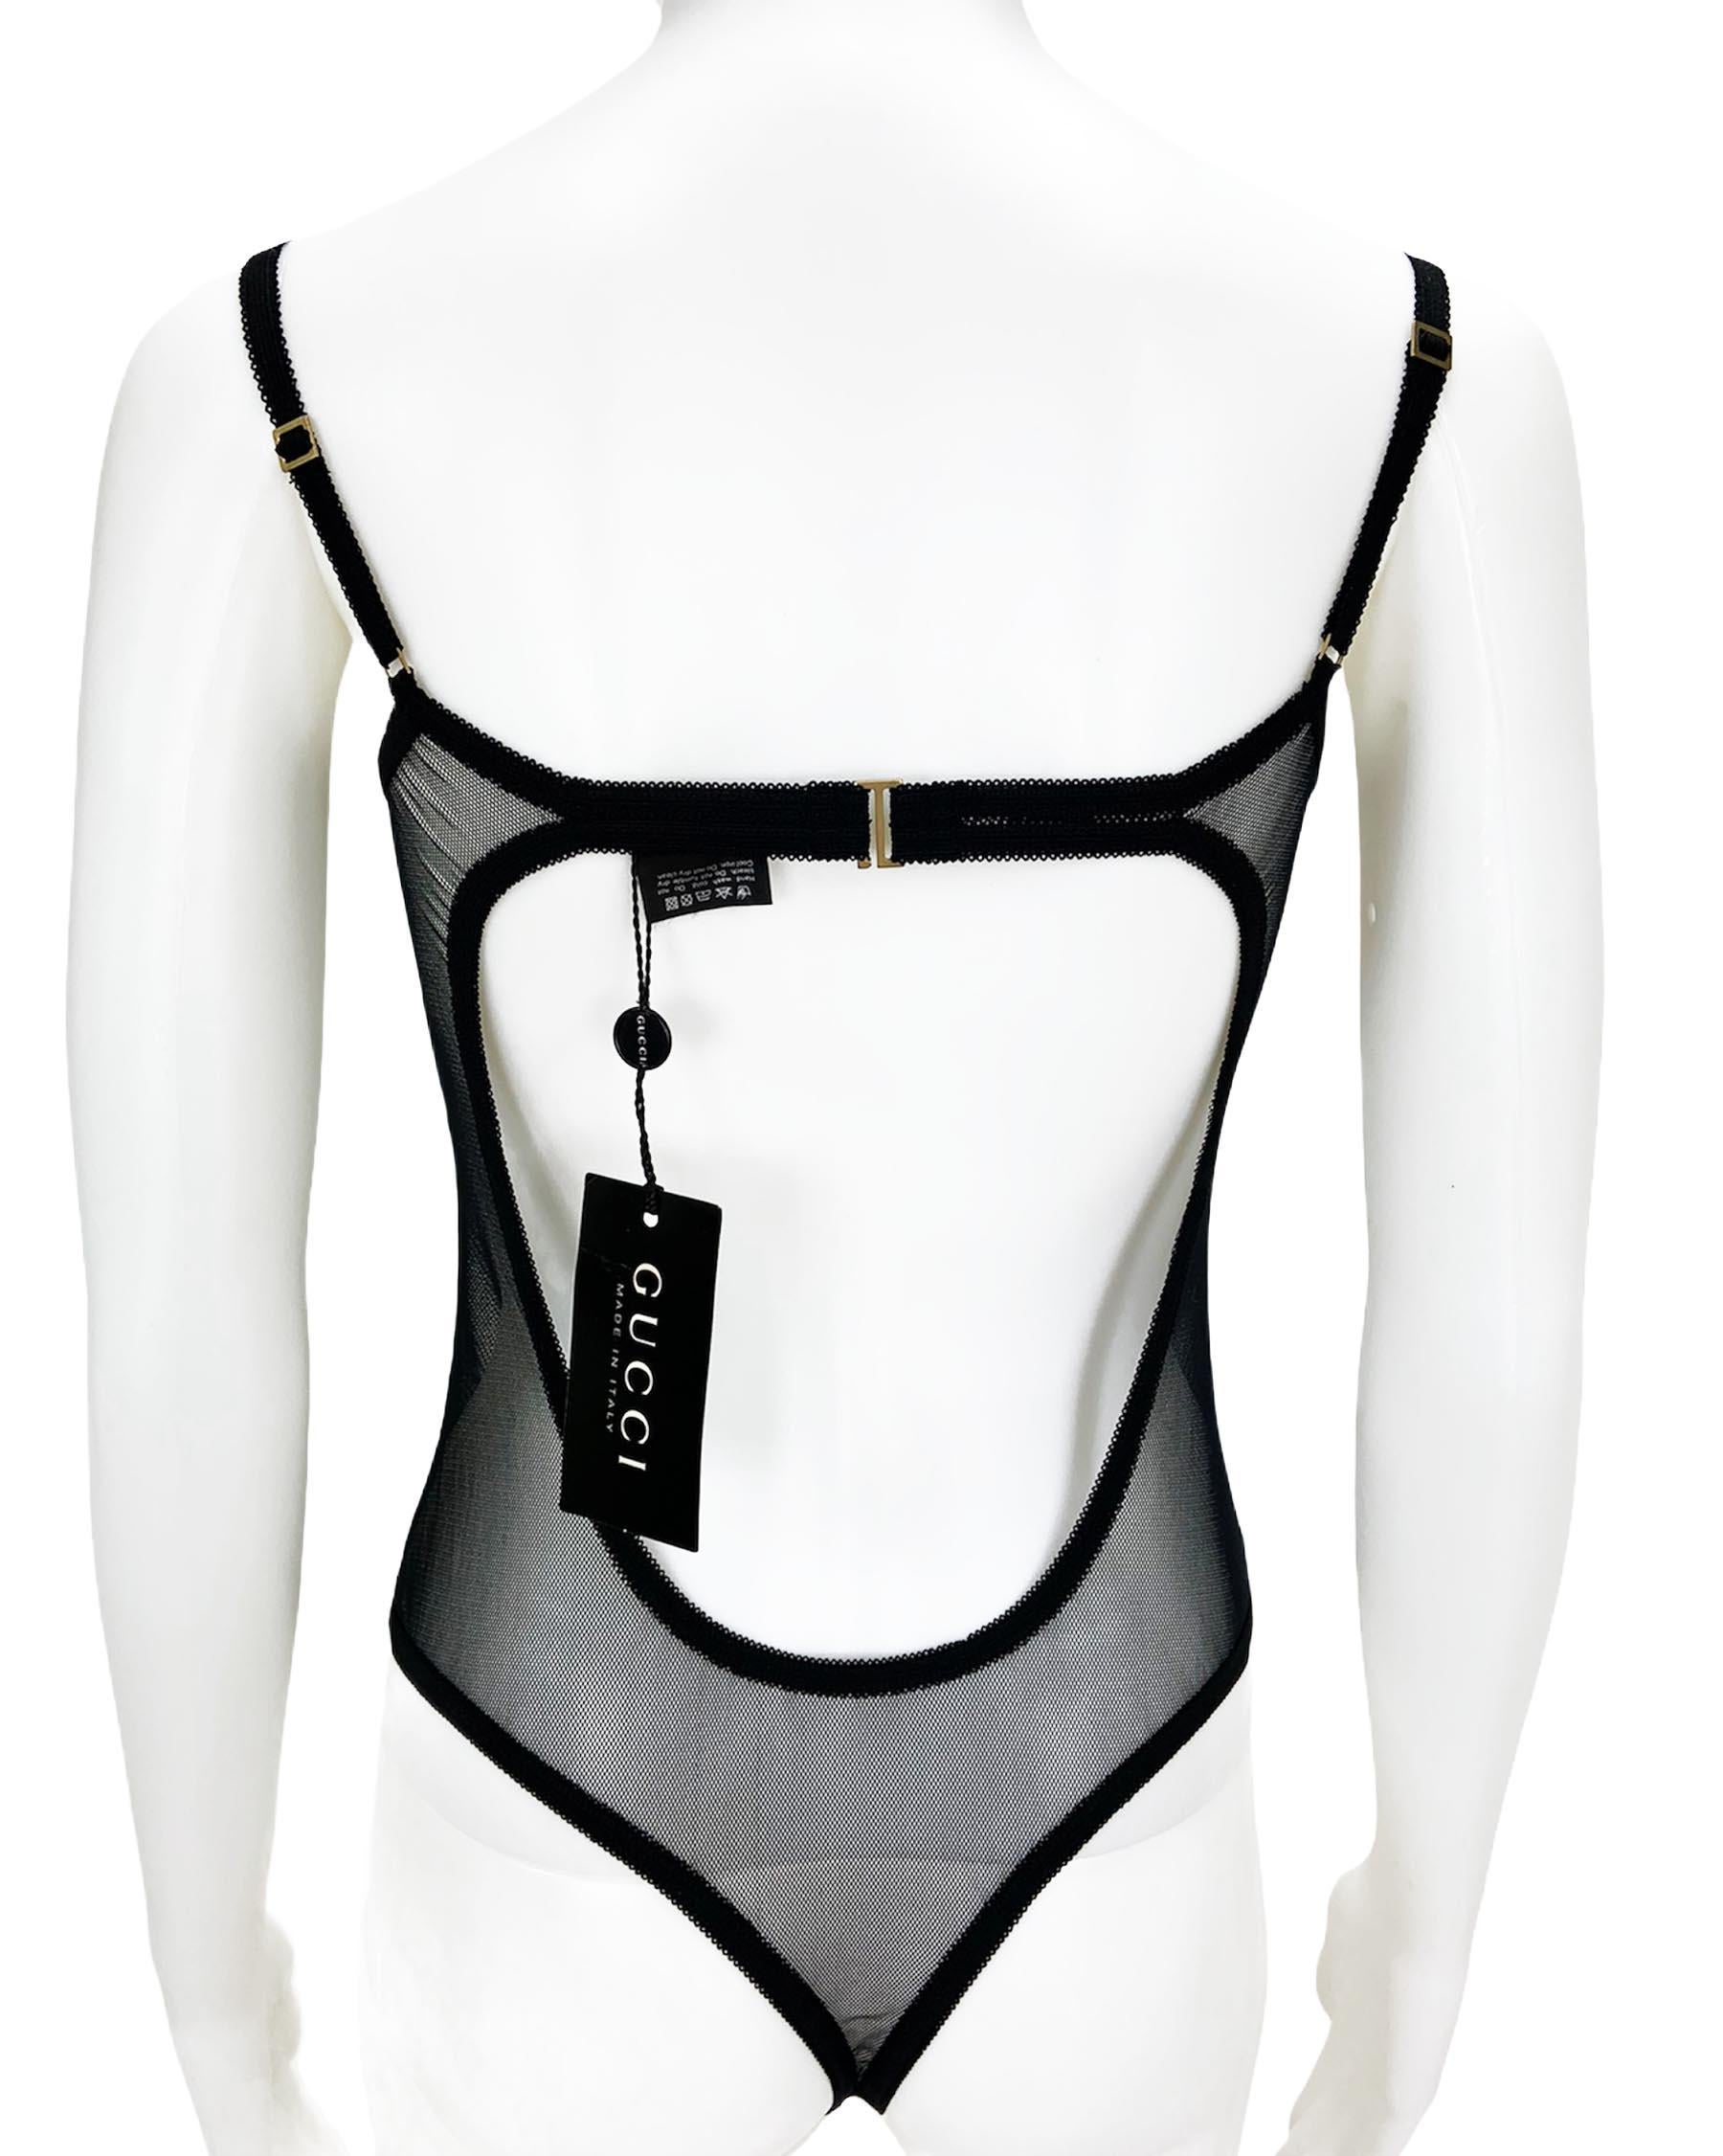 New Gucci Vintage Black Lingerie Bodysuit
Designer size - L.
Black net semi-sheer construction, stretch-fit, satin details, underwire cup, adjustable shoulder straps and snap-buttons.
89% nylon, 11% elastane.
Made in Italy.
New with tag